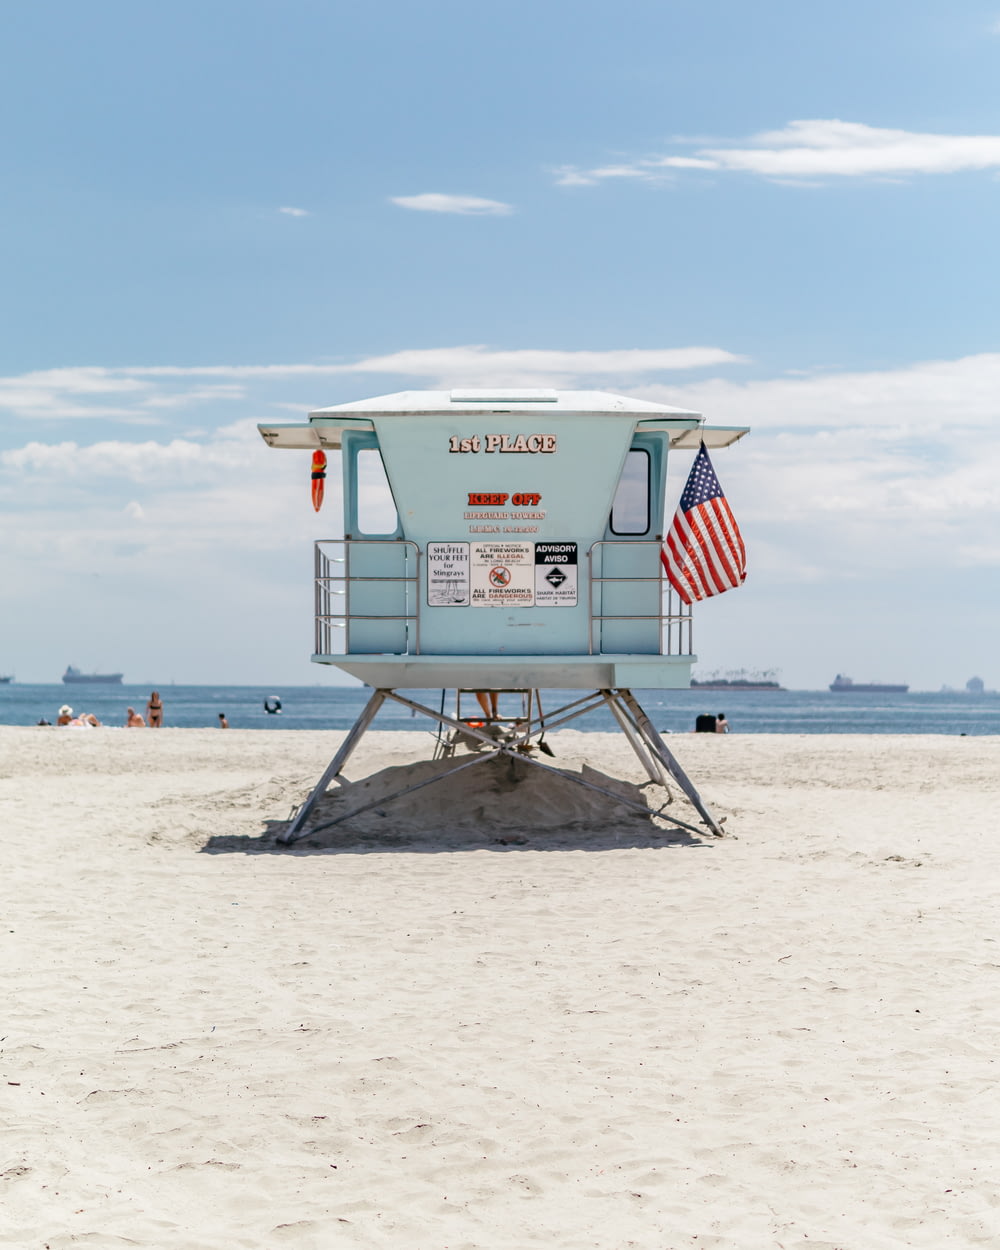 a lifeguard stand on the beach with an american flag